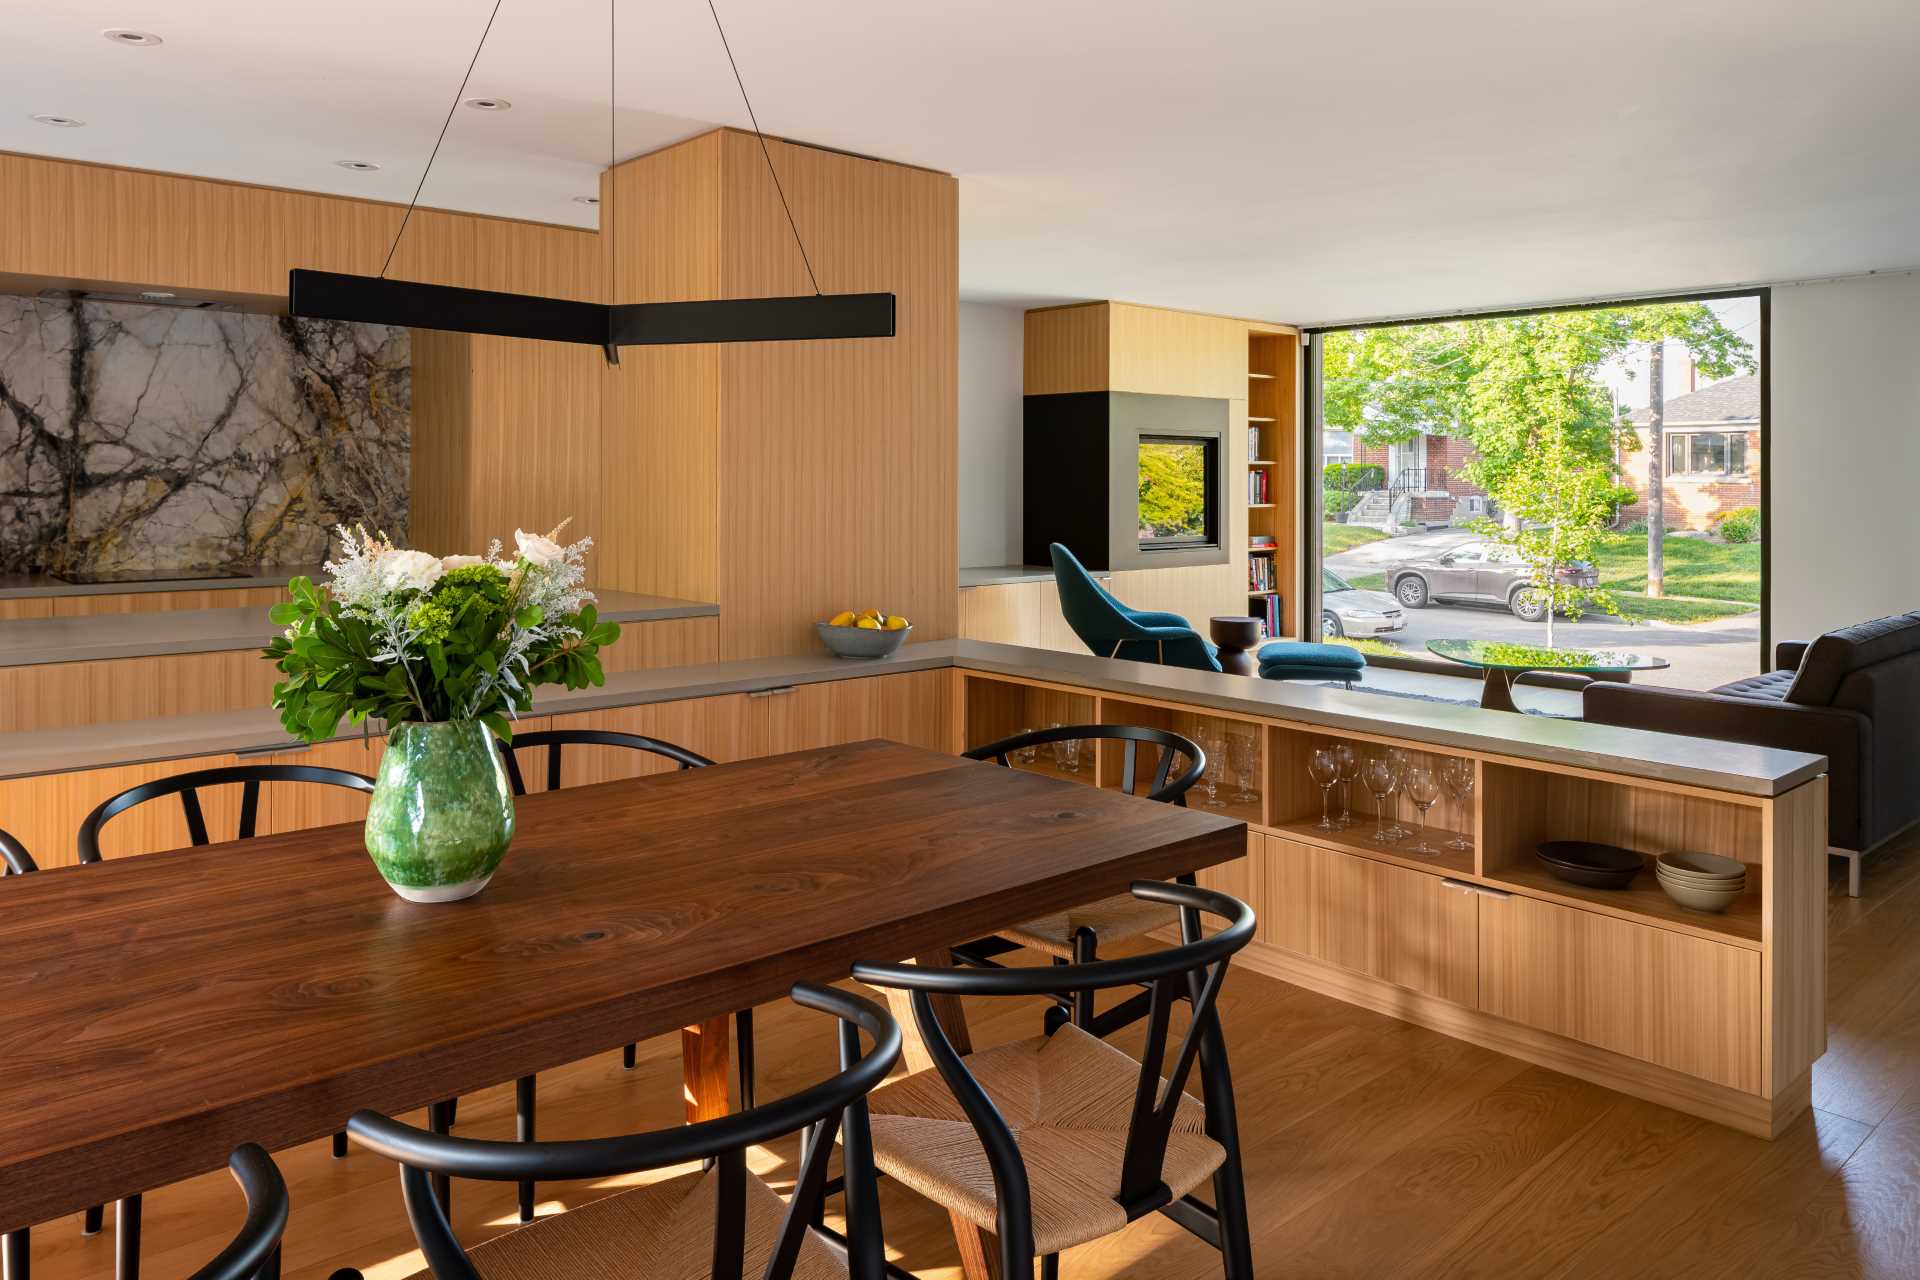 Custom oak cabinetry has been used to separate the dining area, living area, and kitchen in this open interior.